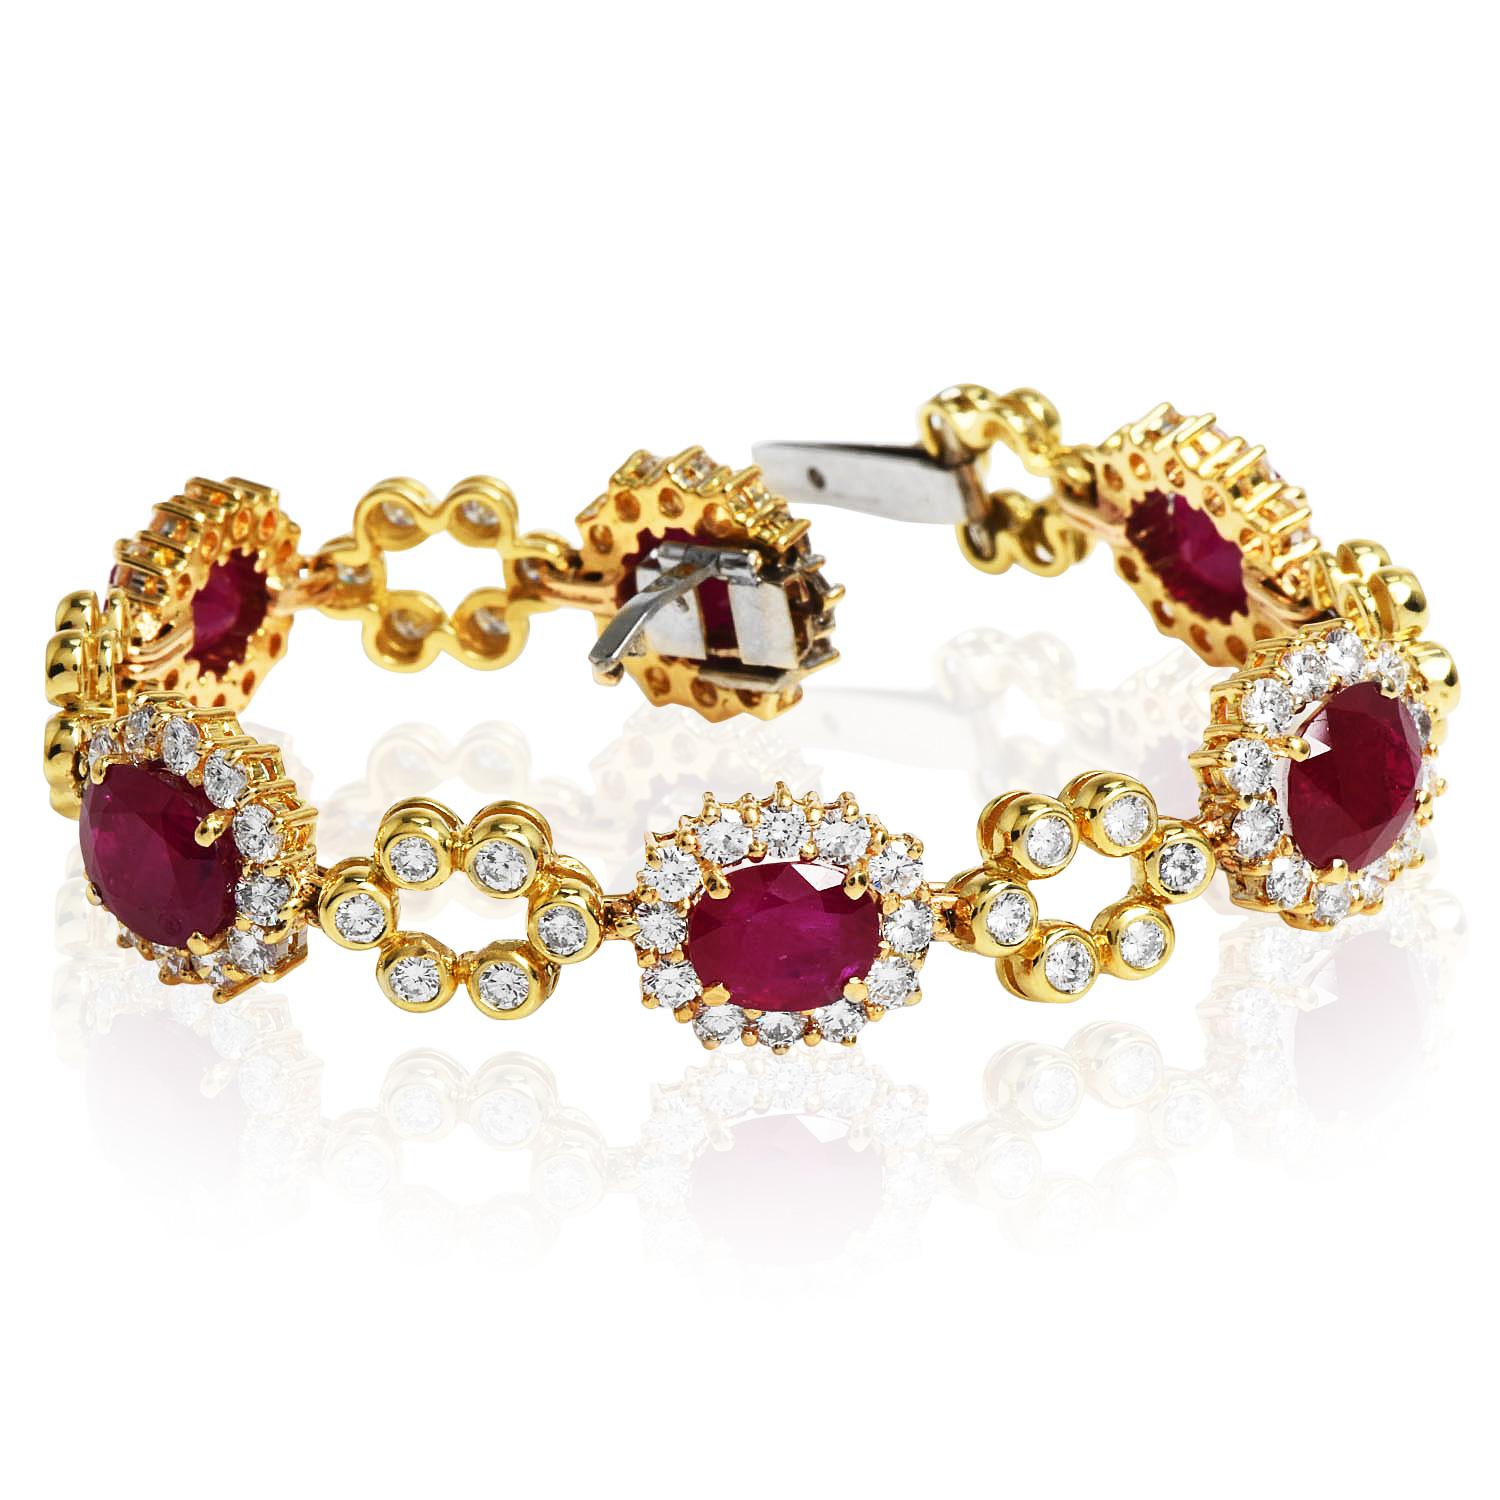 Flower Inspired link Estate Ruby bracelet in 18k yellow gold.

Enhanced in the center with Genuine Rubies with vivid red color, and adding sparkle halo display of Diamonds.

With 108 round-cut, prong & bezel set genuine Diamonds weighing